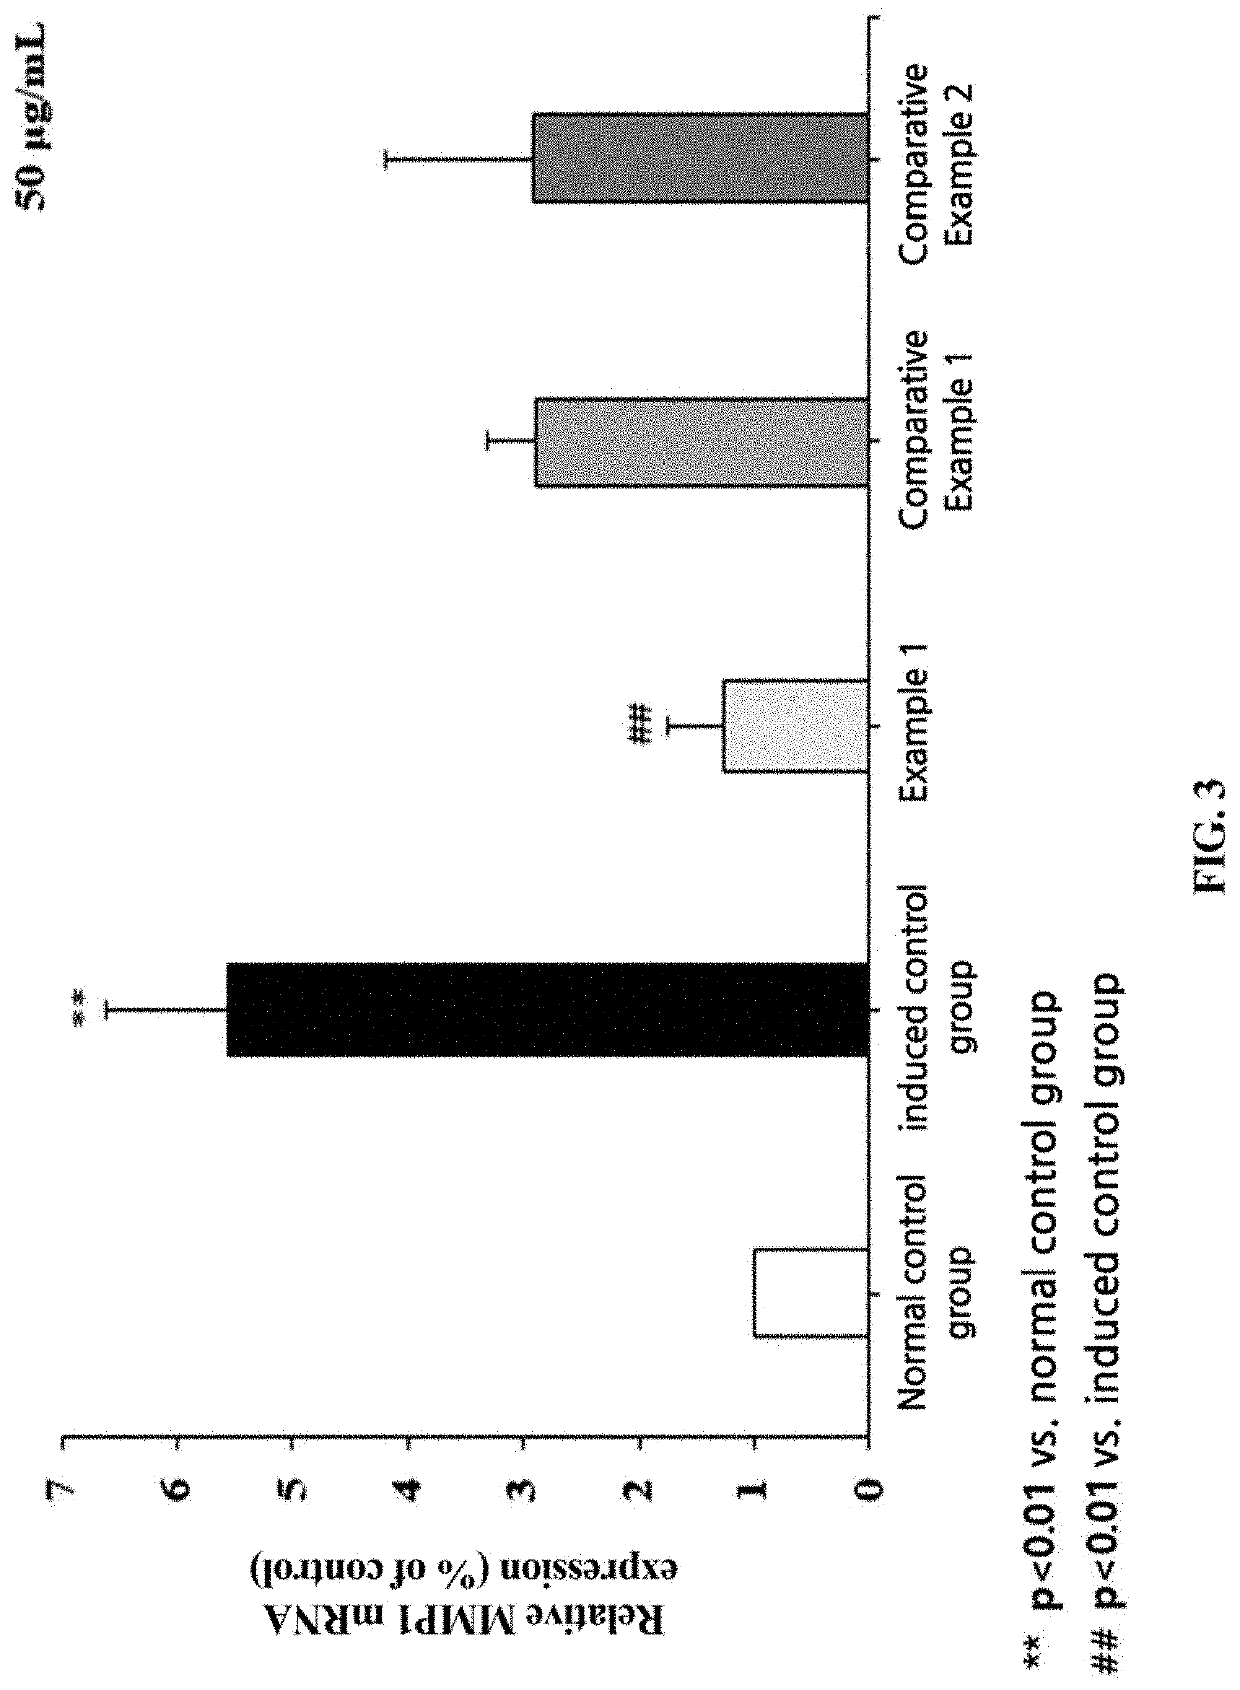 Composition comprising actinidia polygama extract for alleviating skin damage or moisturizing skin